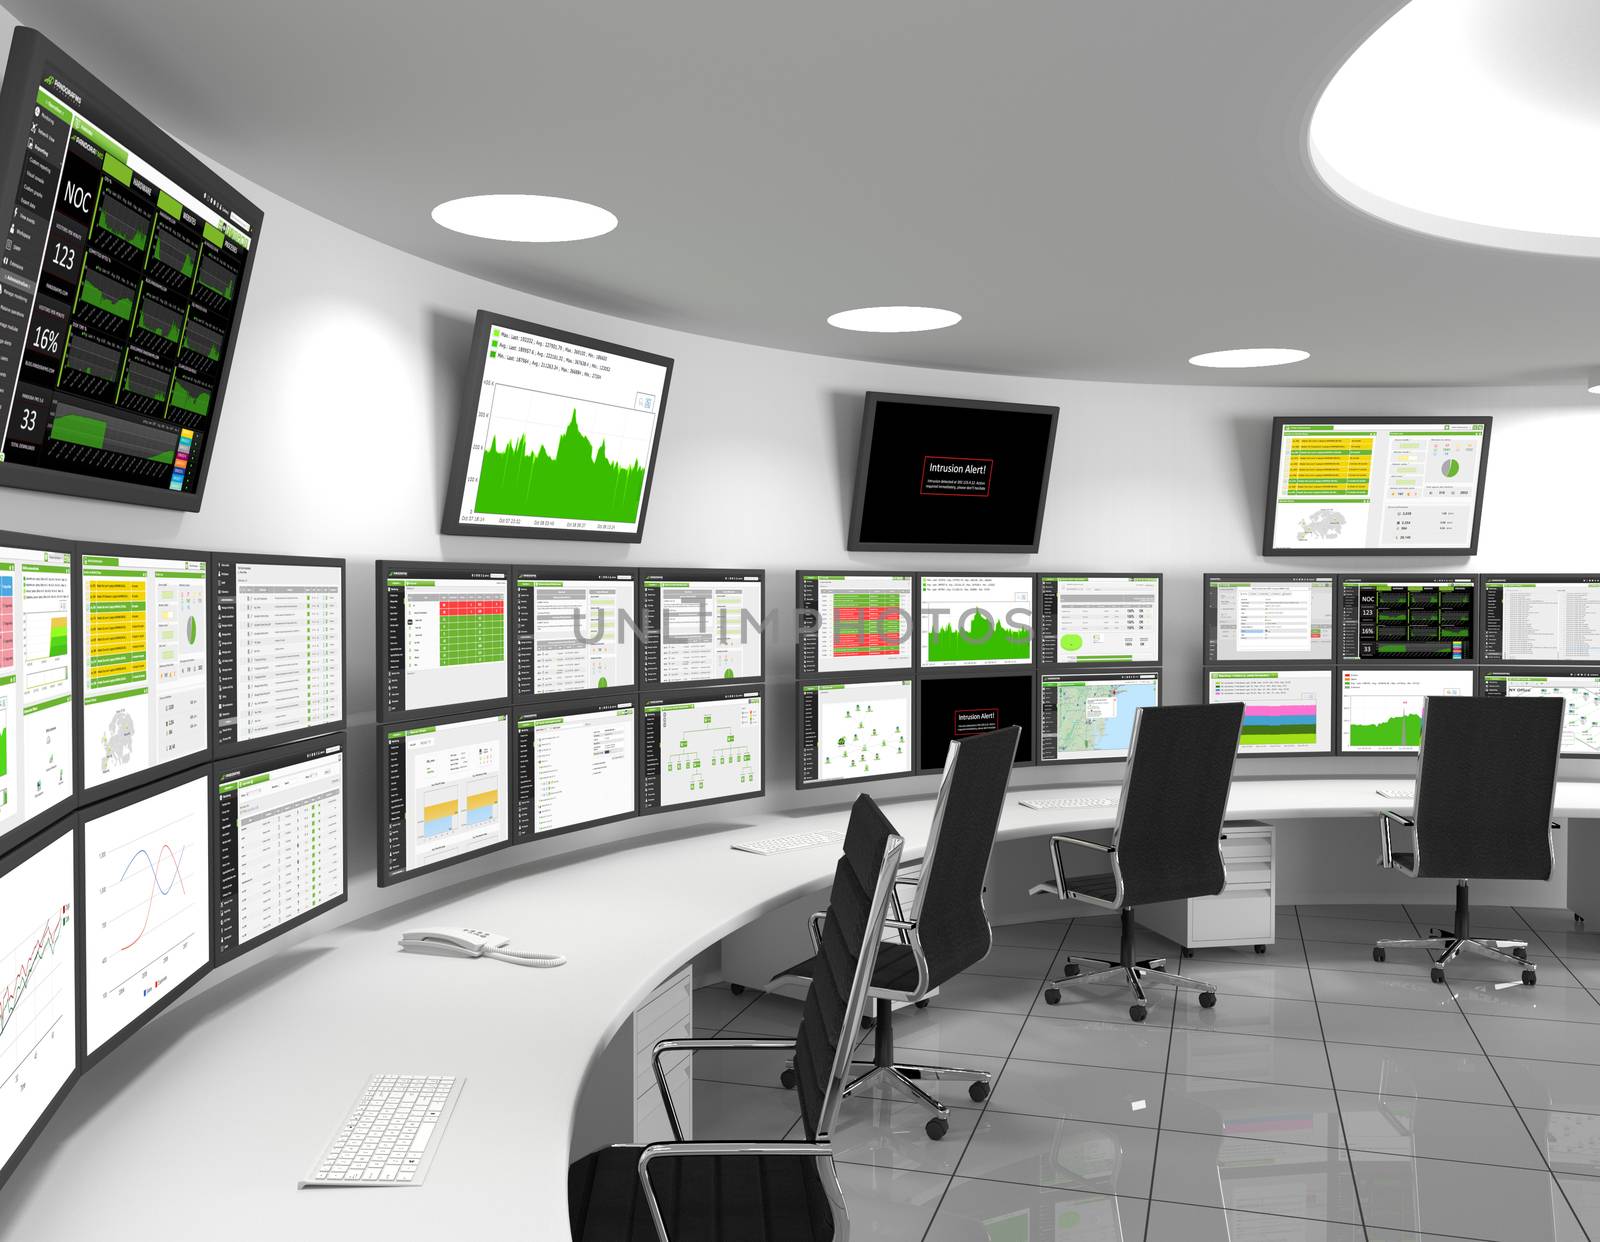 Network Operations Center - A network operations center or NOC also called a "network management center", is a locations from which network monitoring and control, or network management, is exercised over a network.